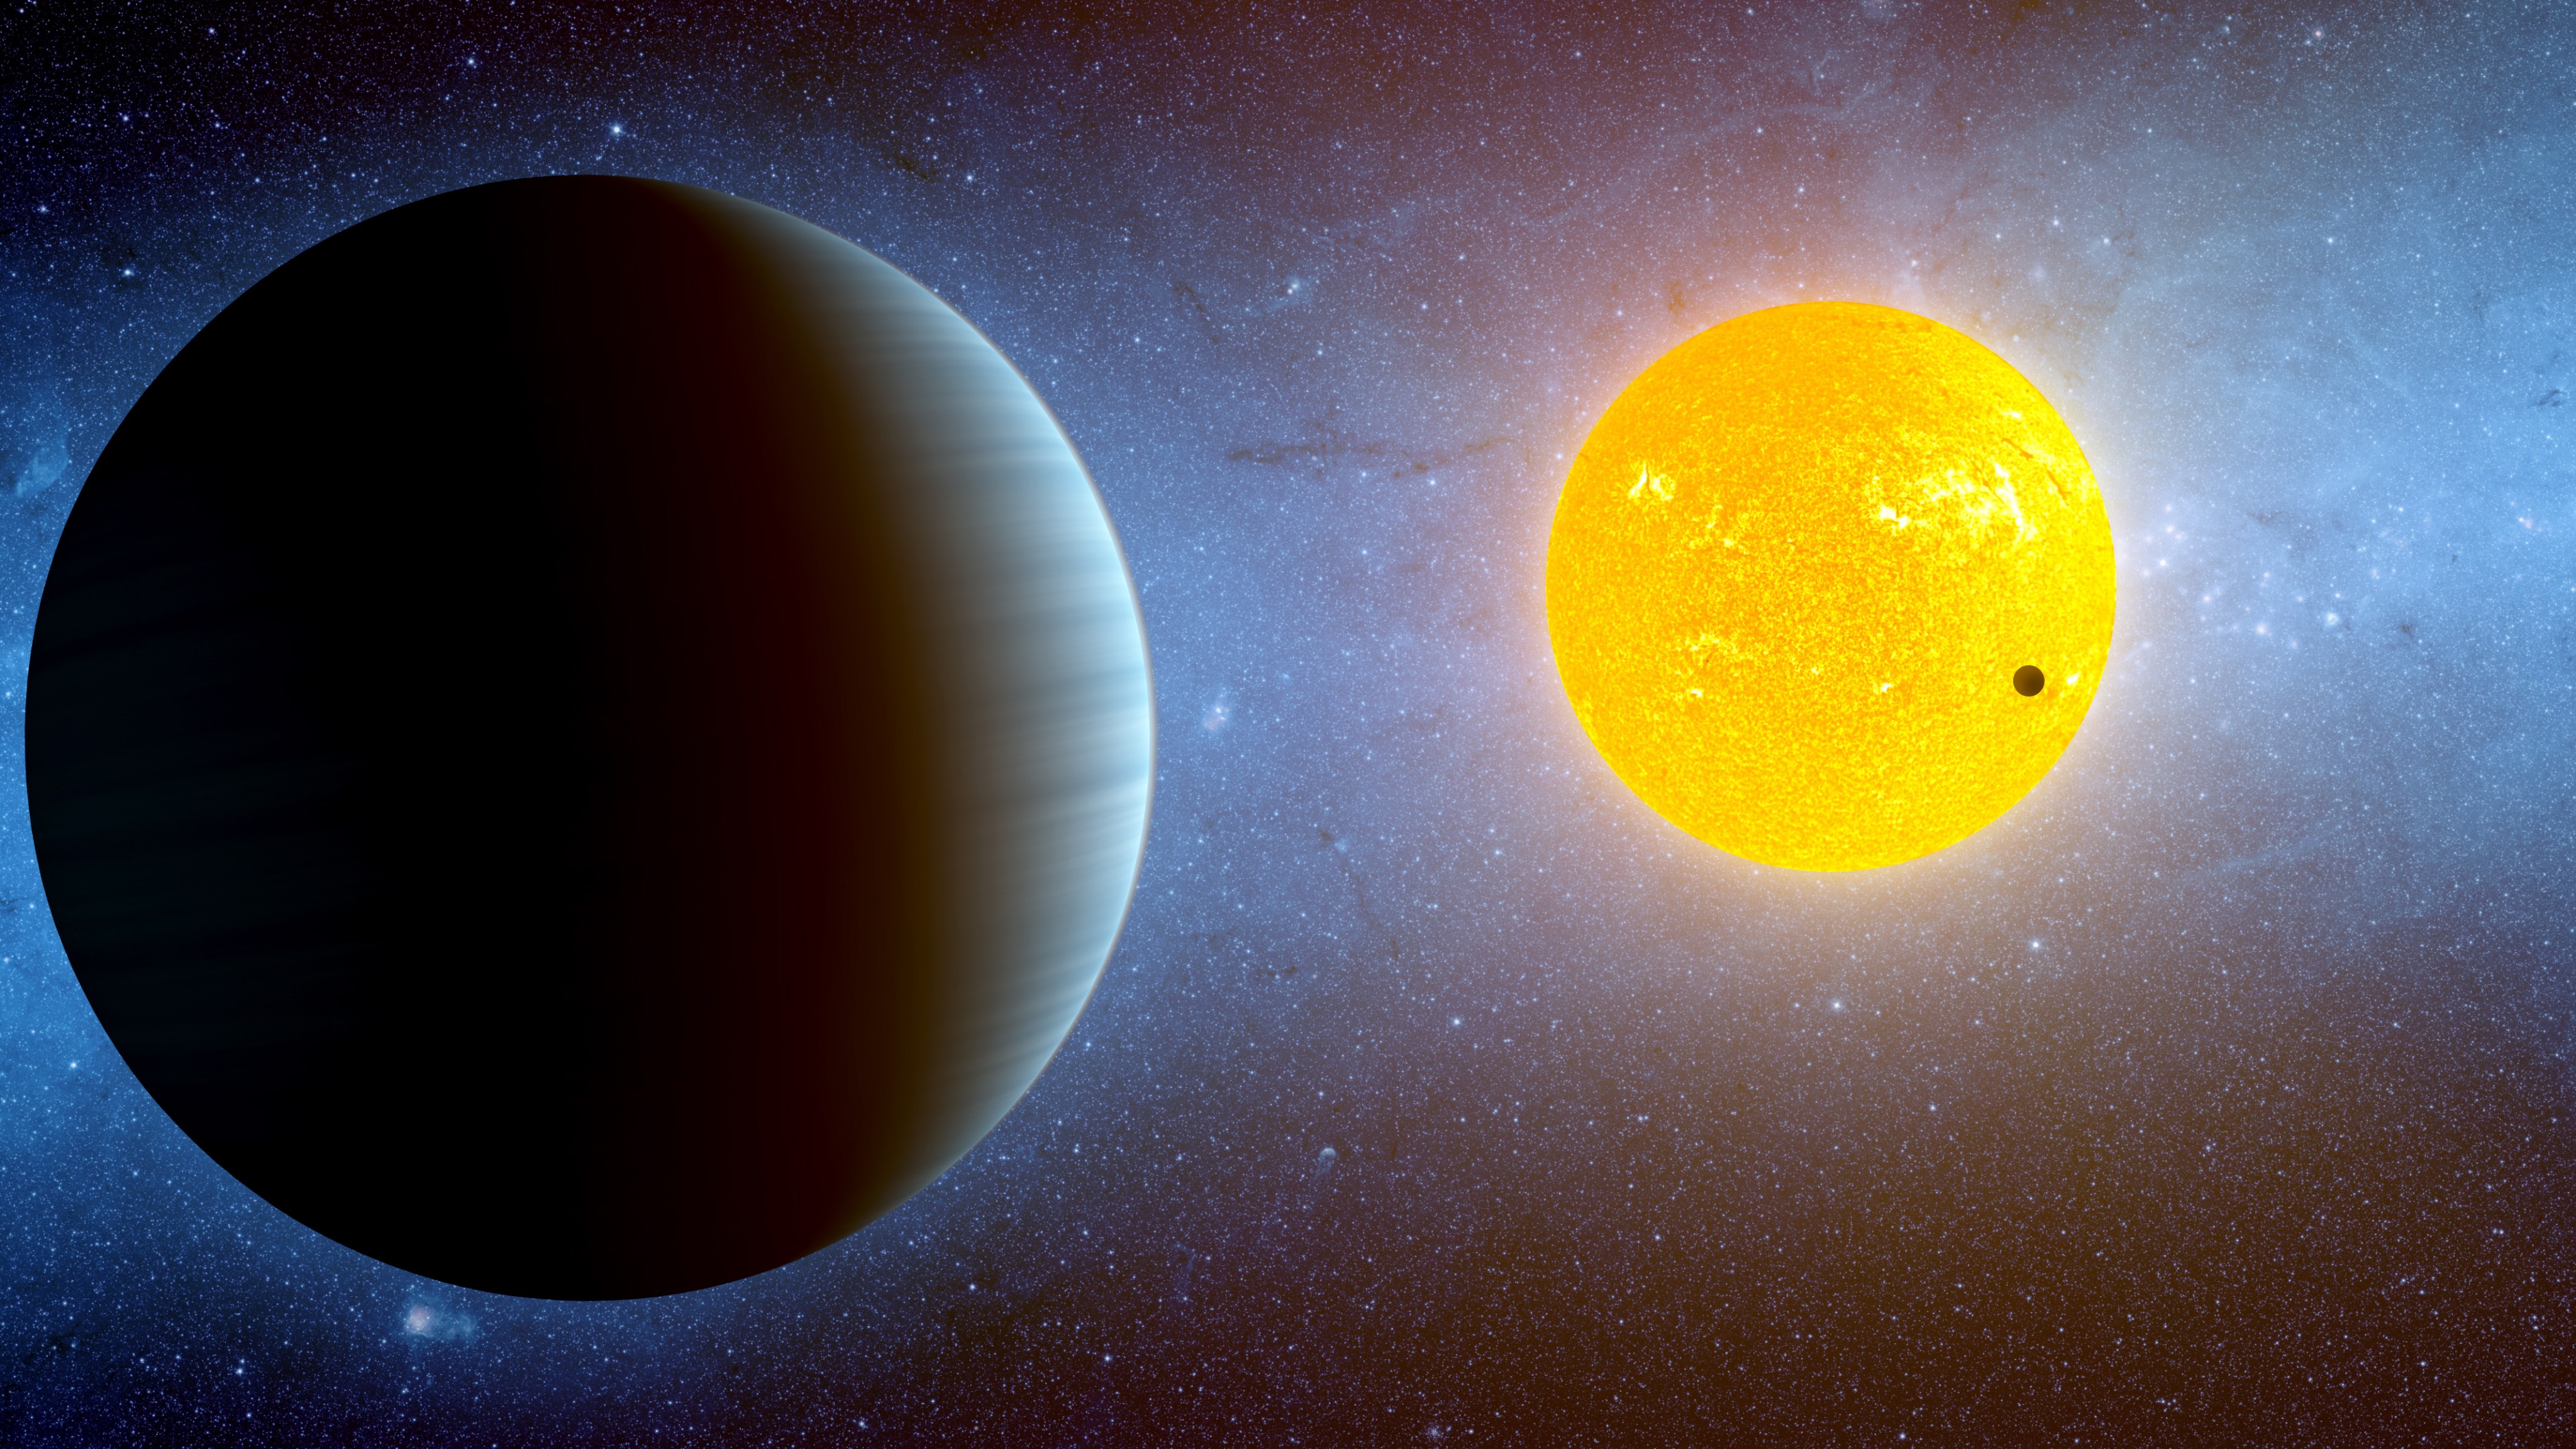 An artist's concept illustration shows a planet large in the frame and back-lit by a nearby bright yellow star. Another planet in the system can be seen as a black dot crossing the face of the star against the background of space.